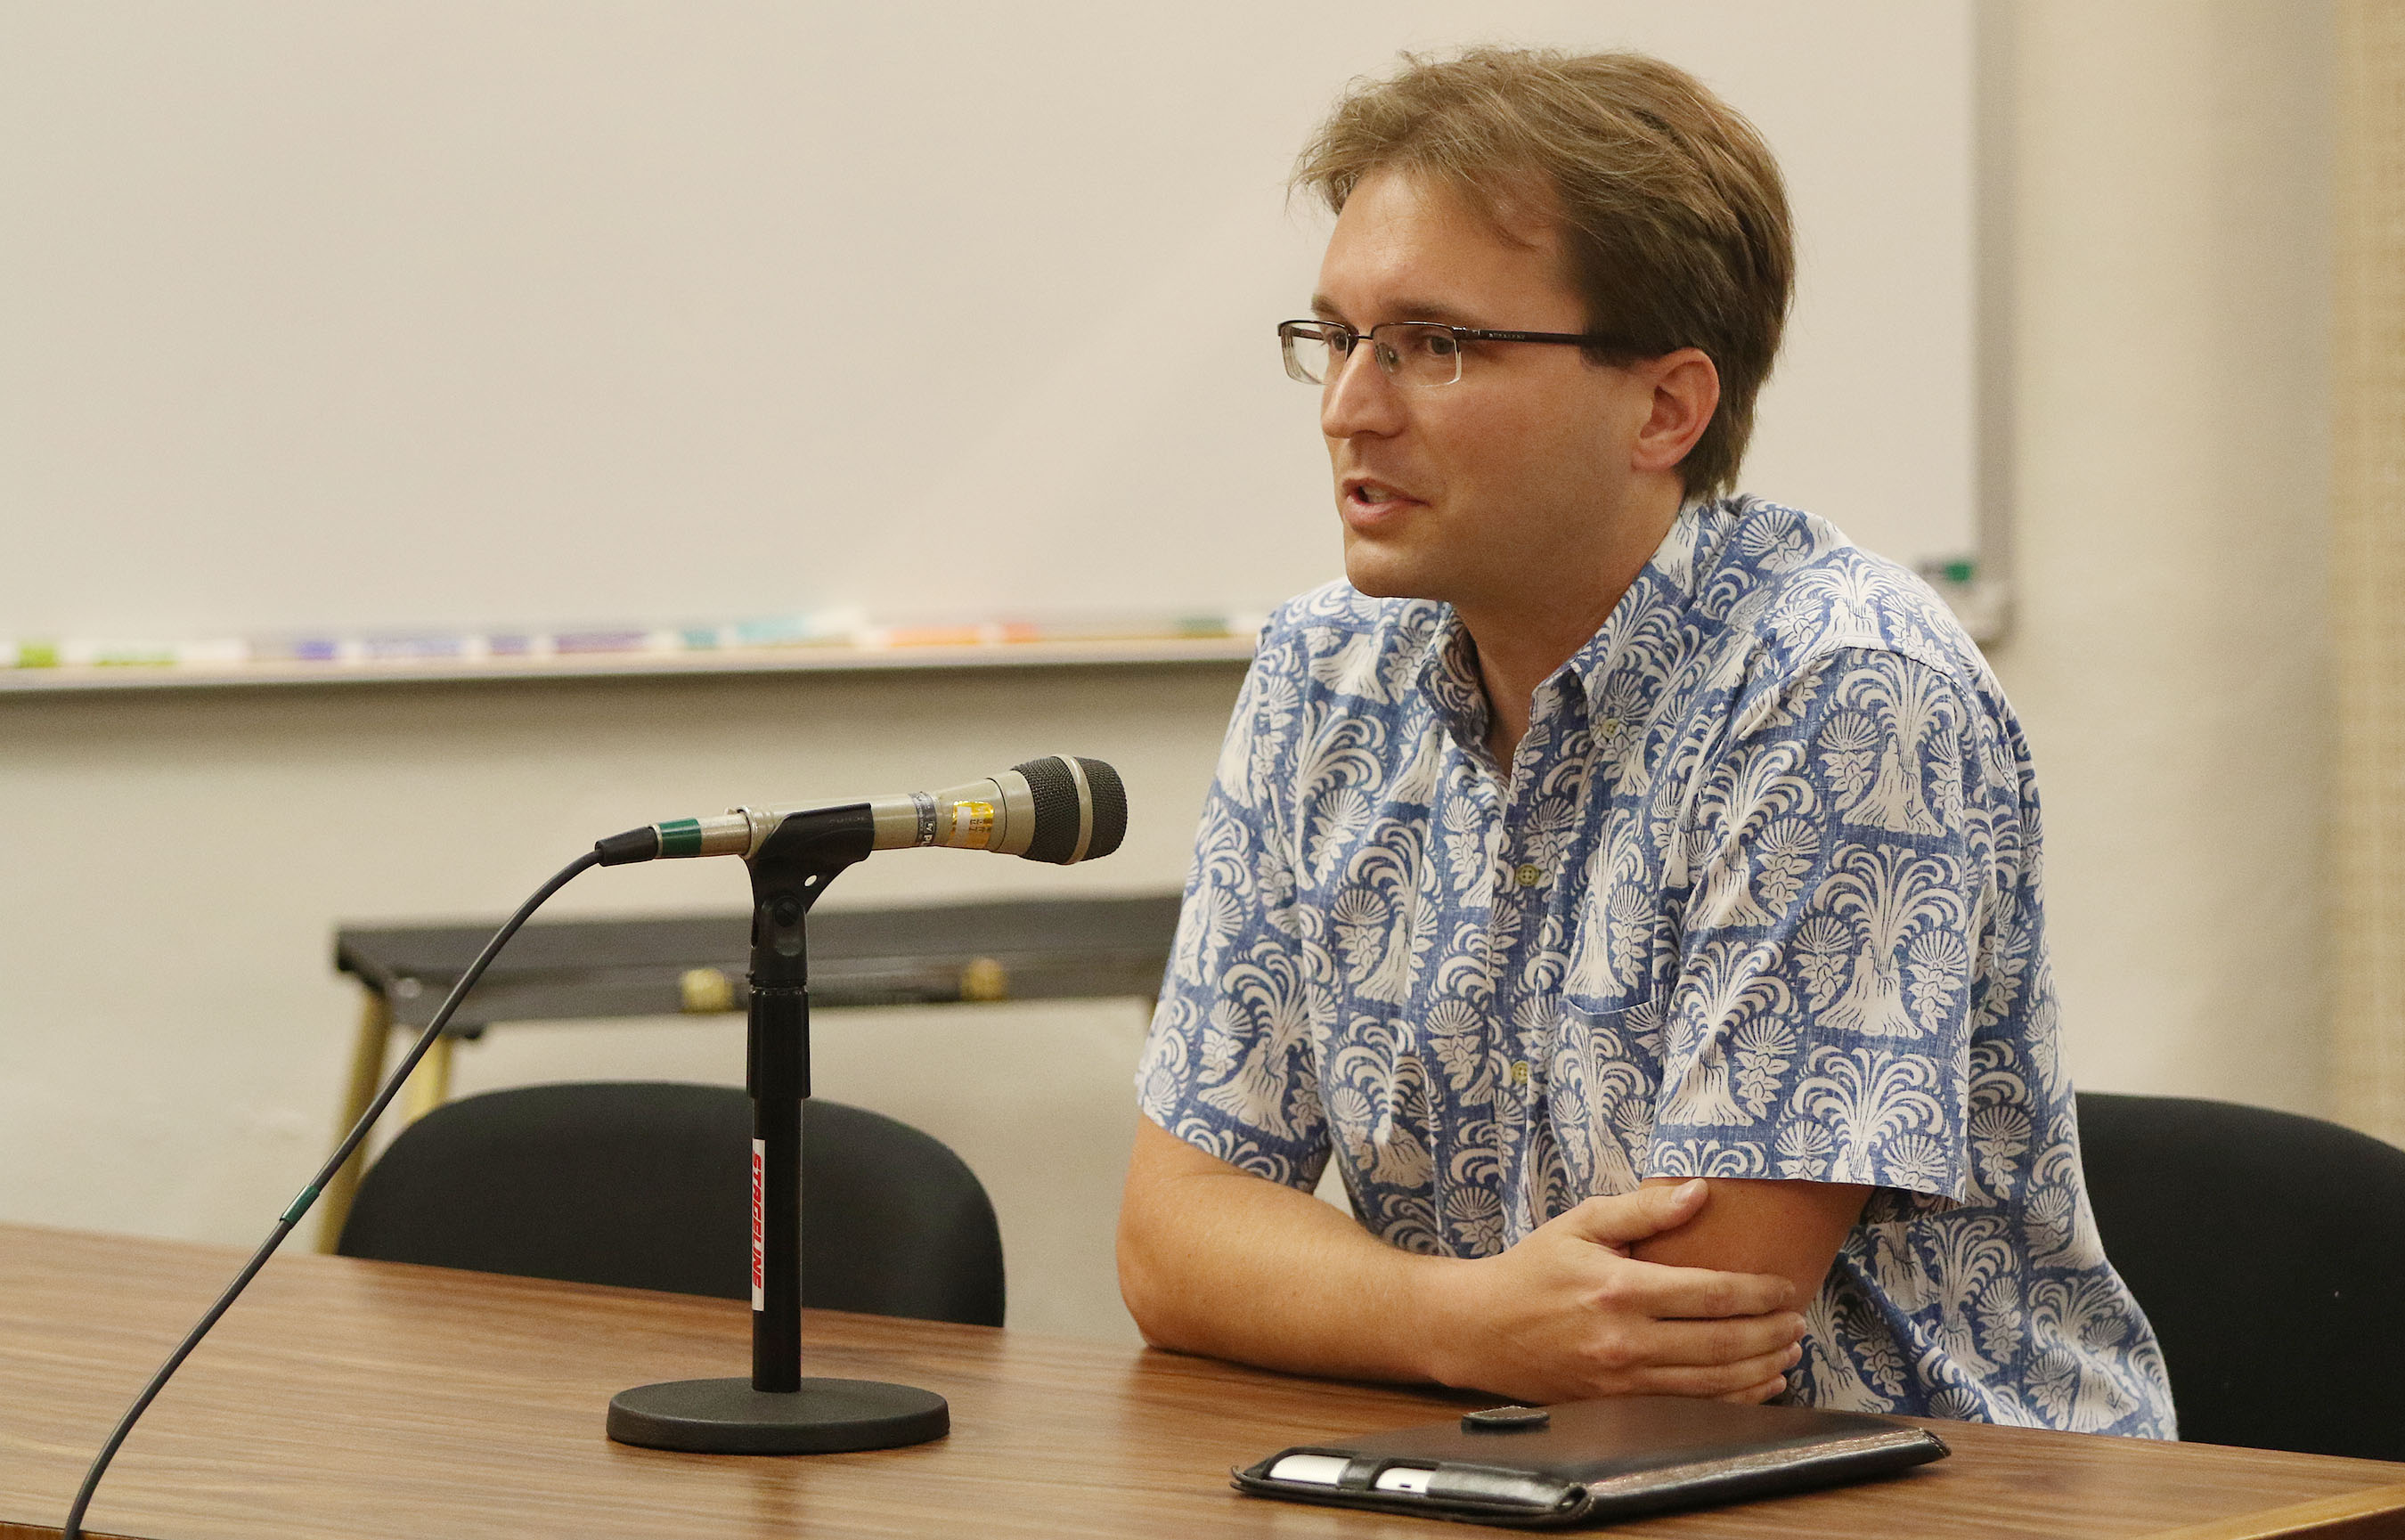 R Brian Black Executive Director Civil Beat Law Center for the Public Interest testifies during charter commission meeting at Honolulu Hale.